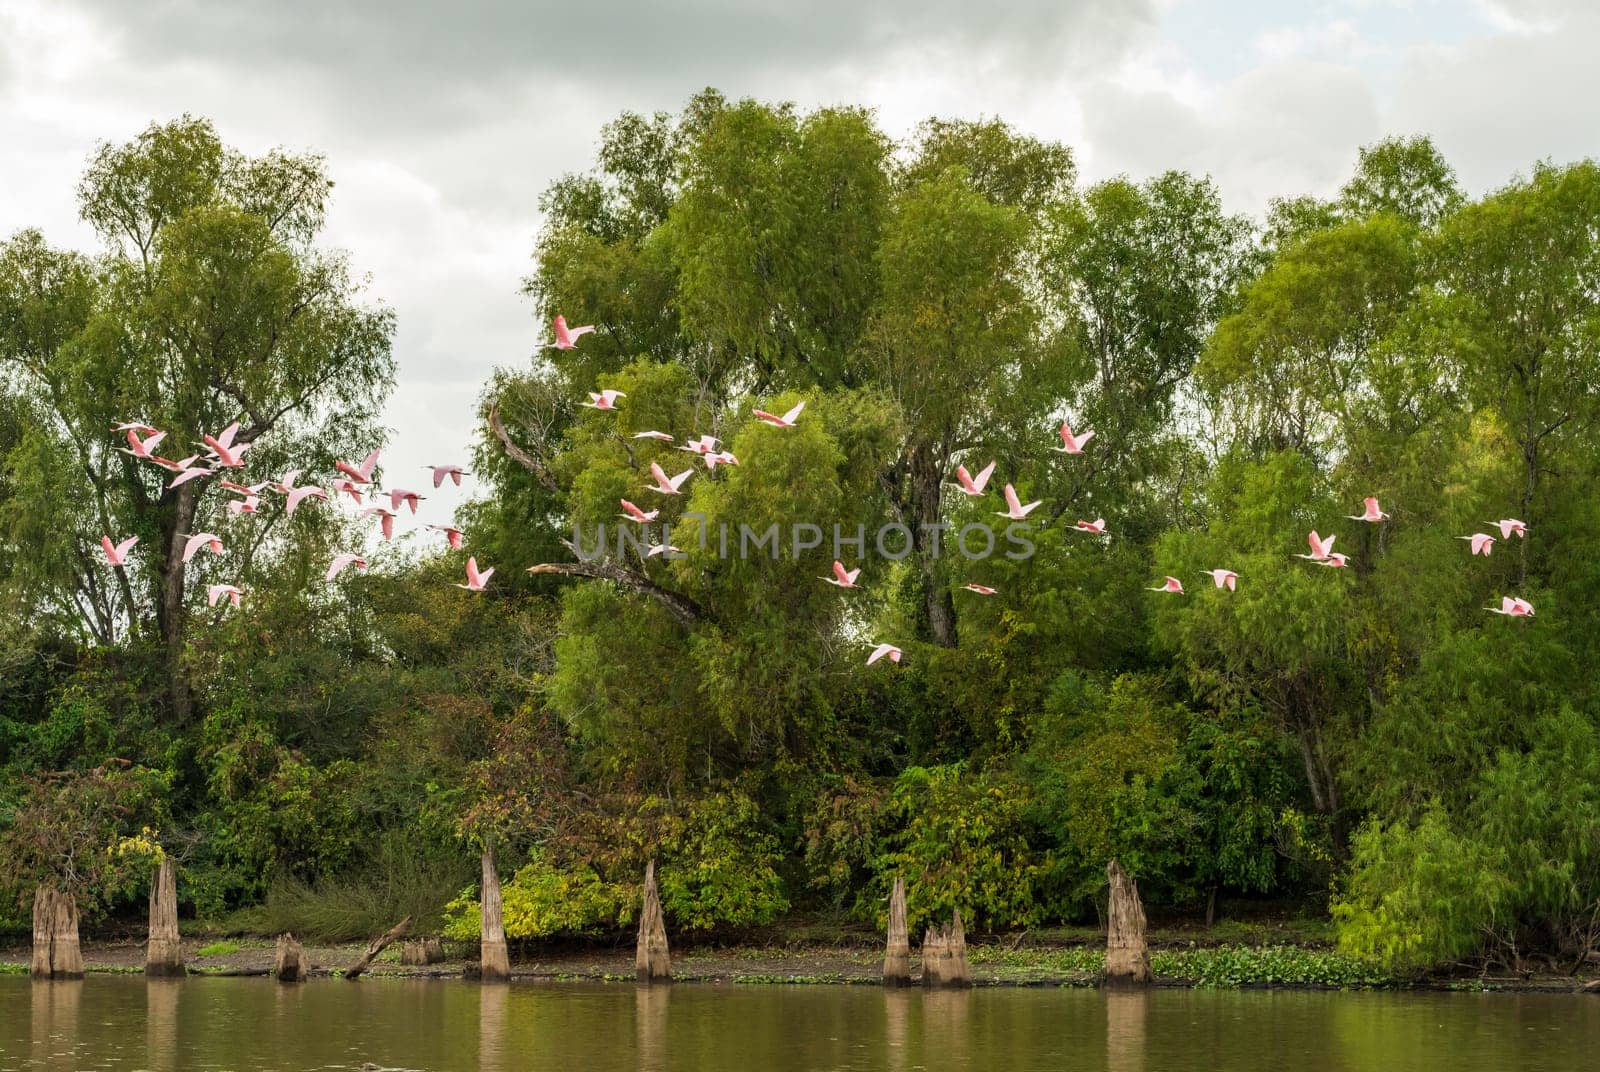 Large flock of Roseate spoonbill birds taking flight by the bald cypress and calm waters of Atchafalaya Basin near Baton Rouge Louisiana